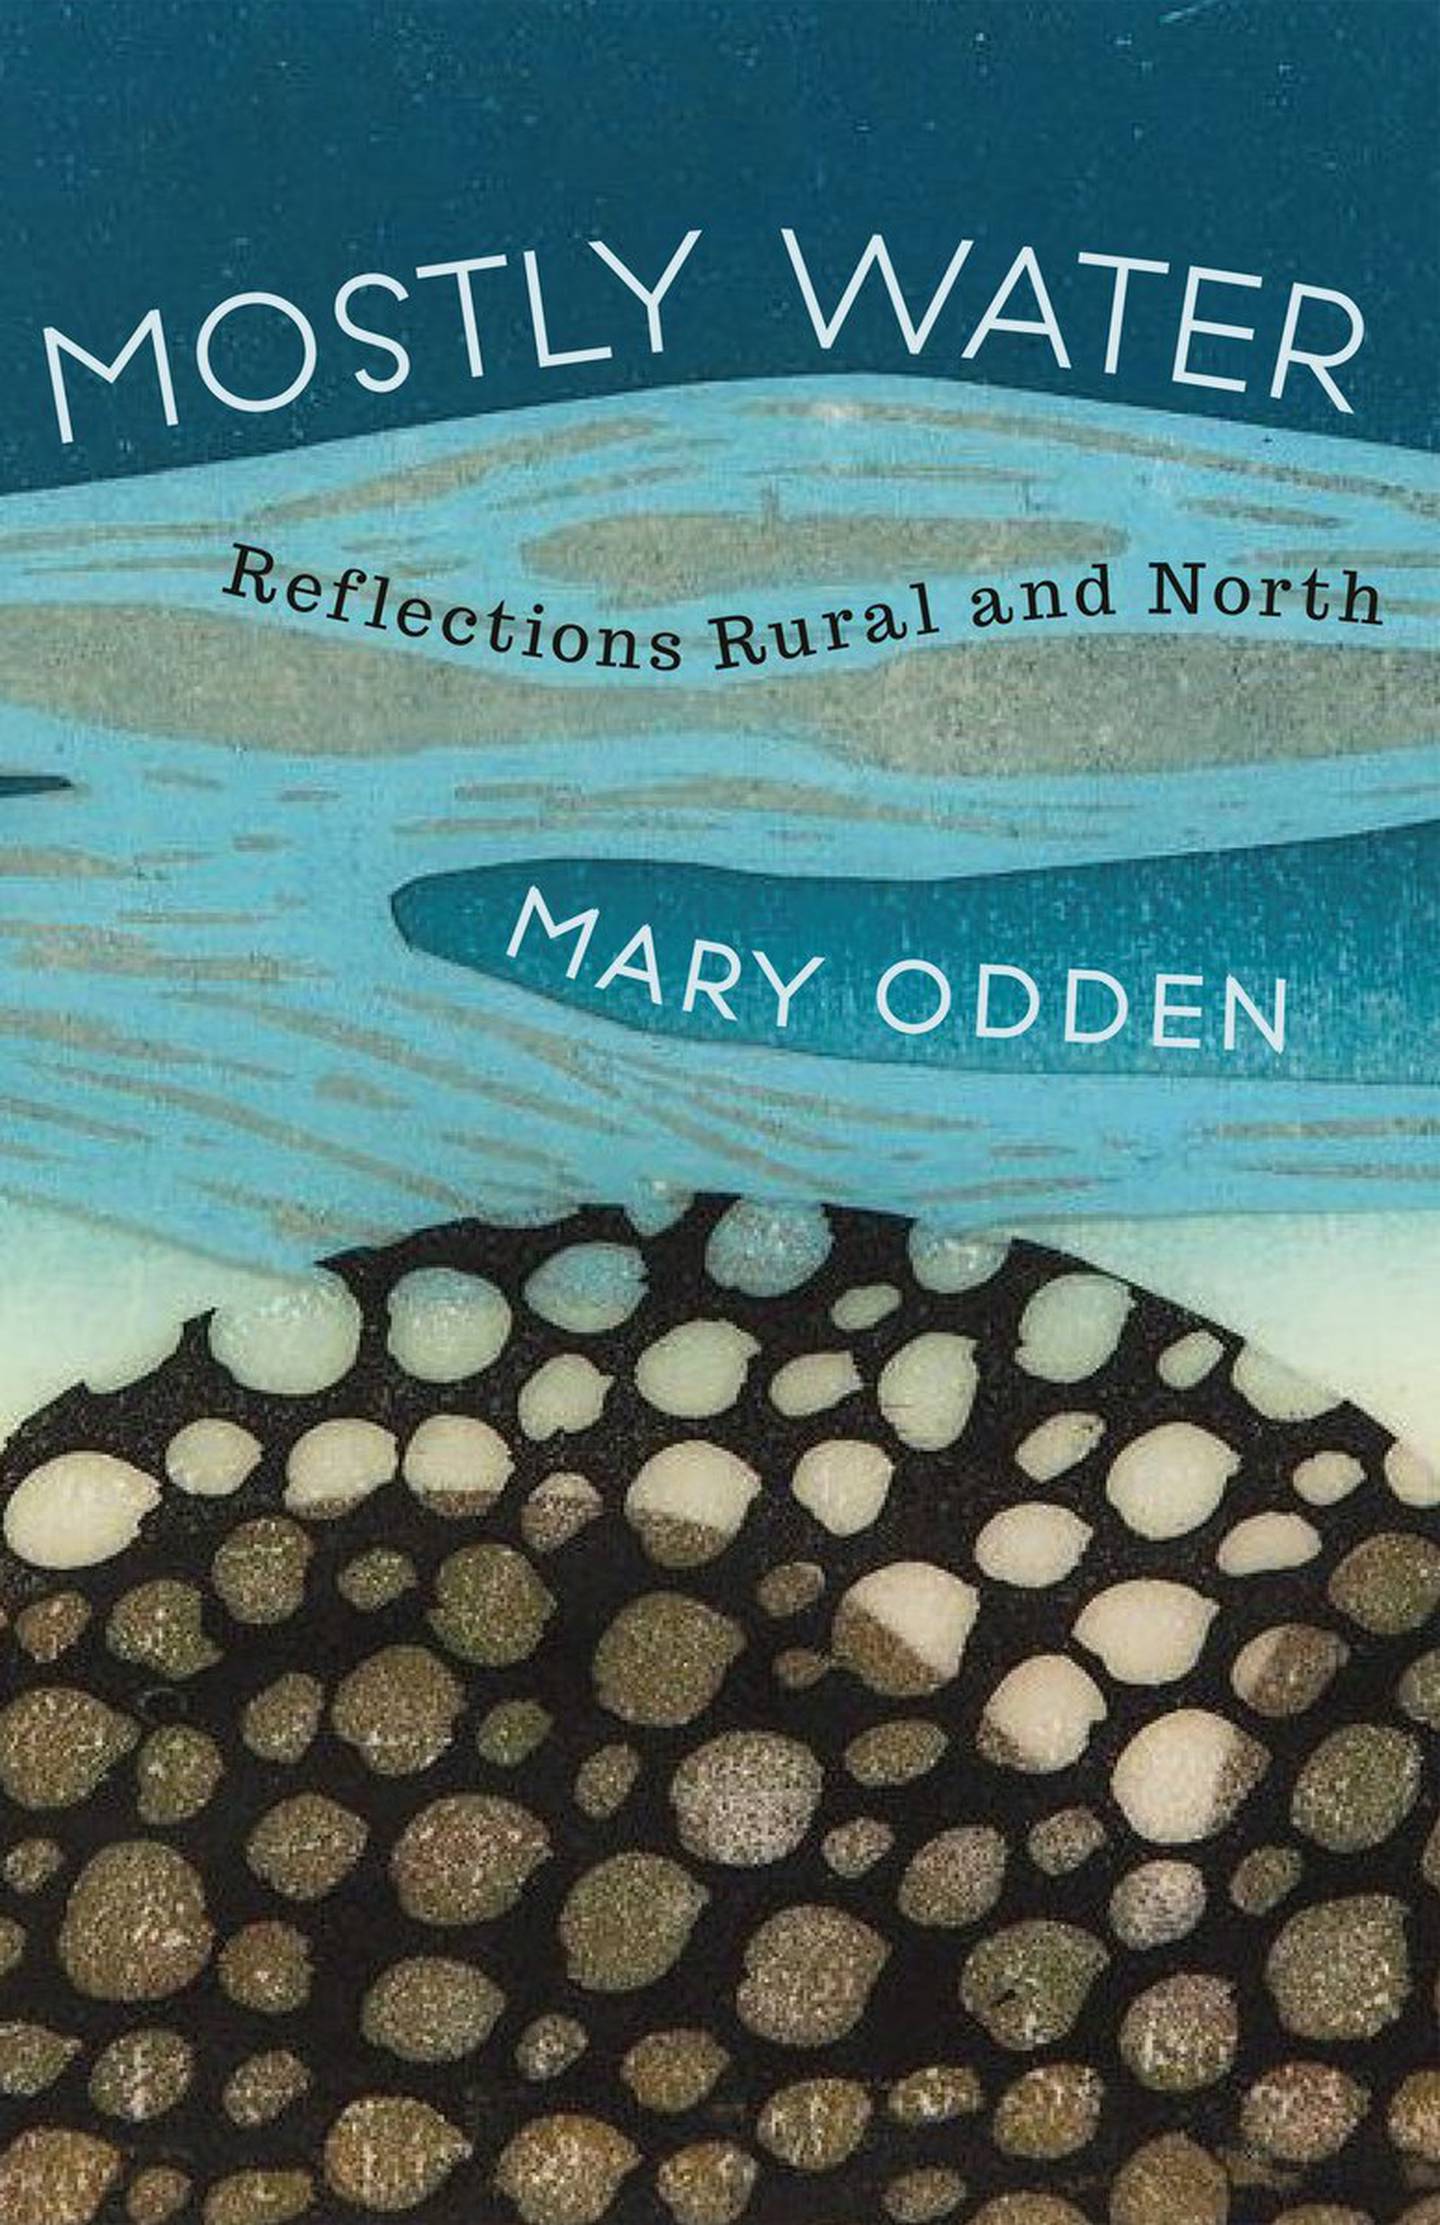 “Mostly Water,” by Mary Odden